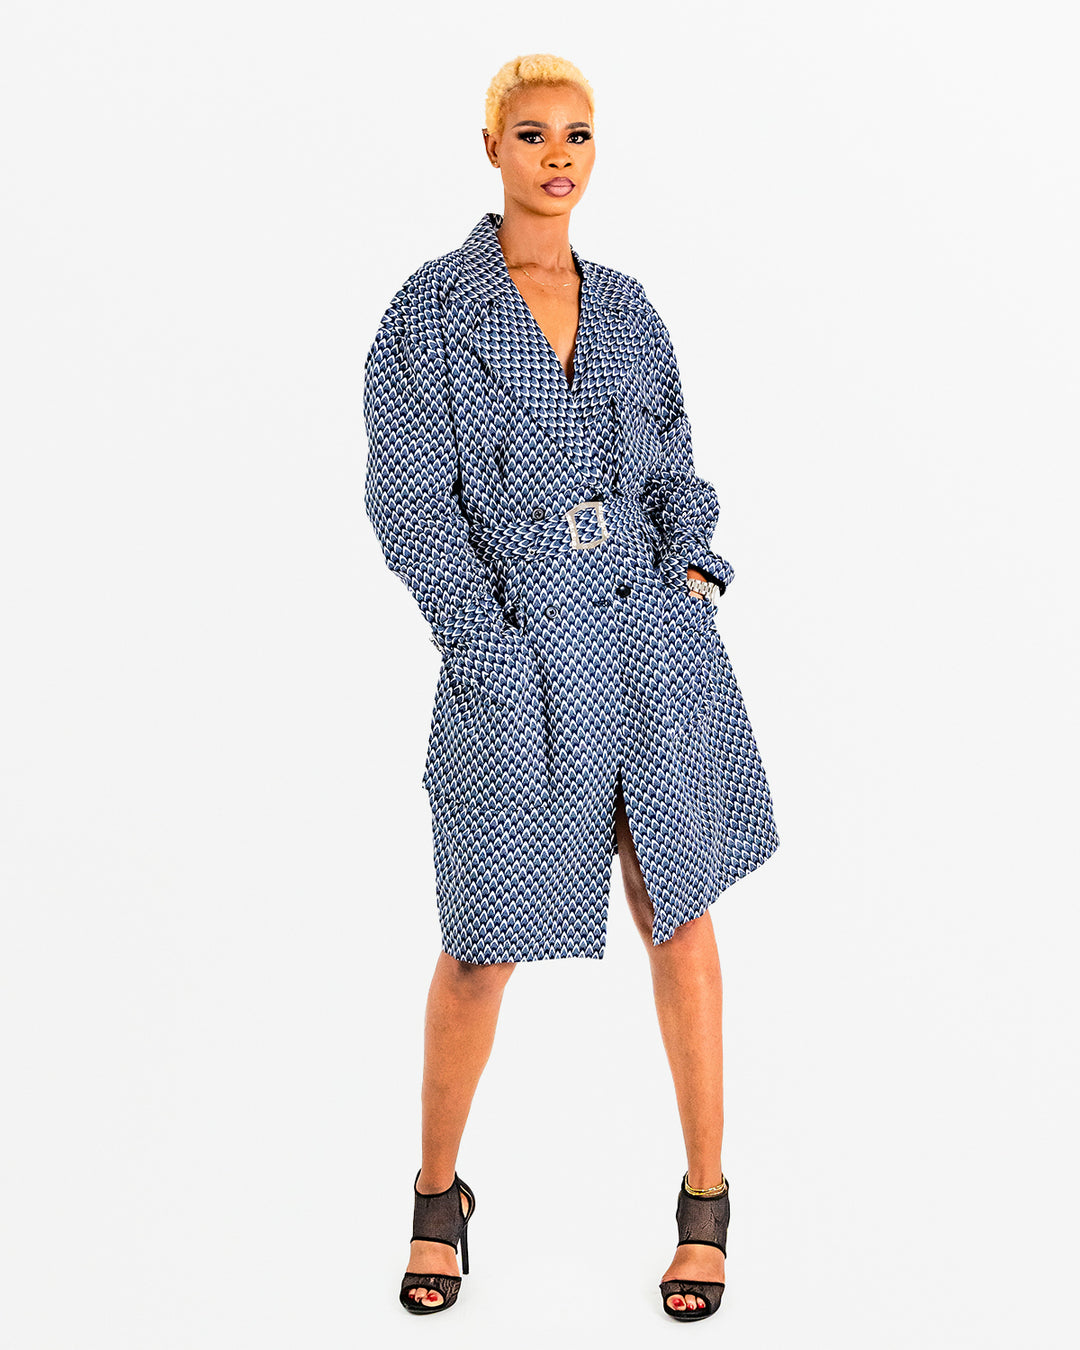 A woman posing in a blue and black African print trench coat.